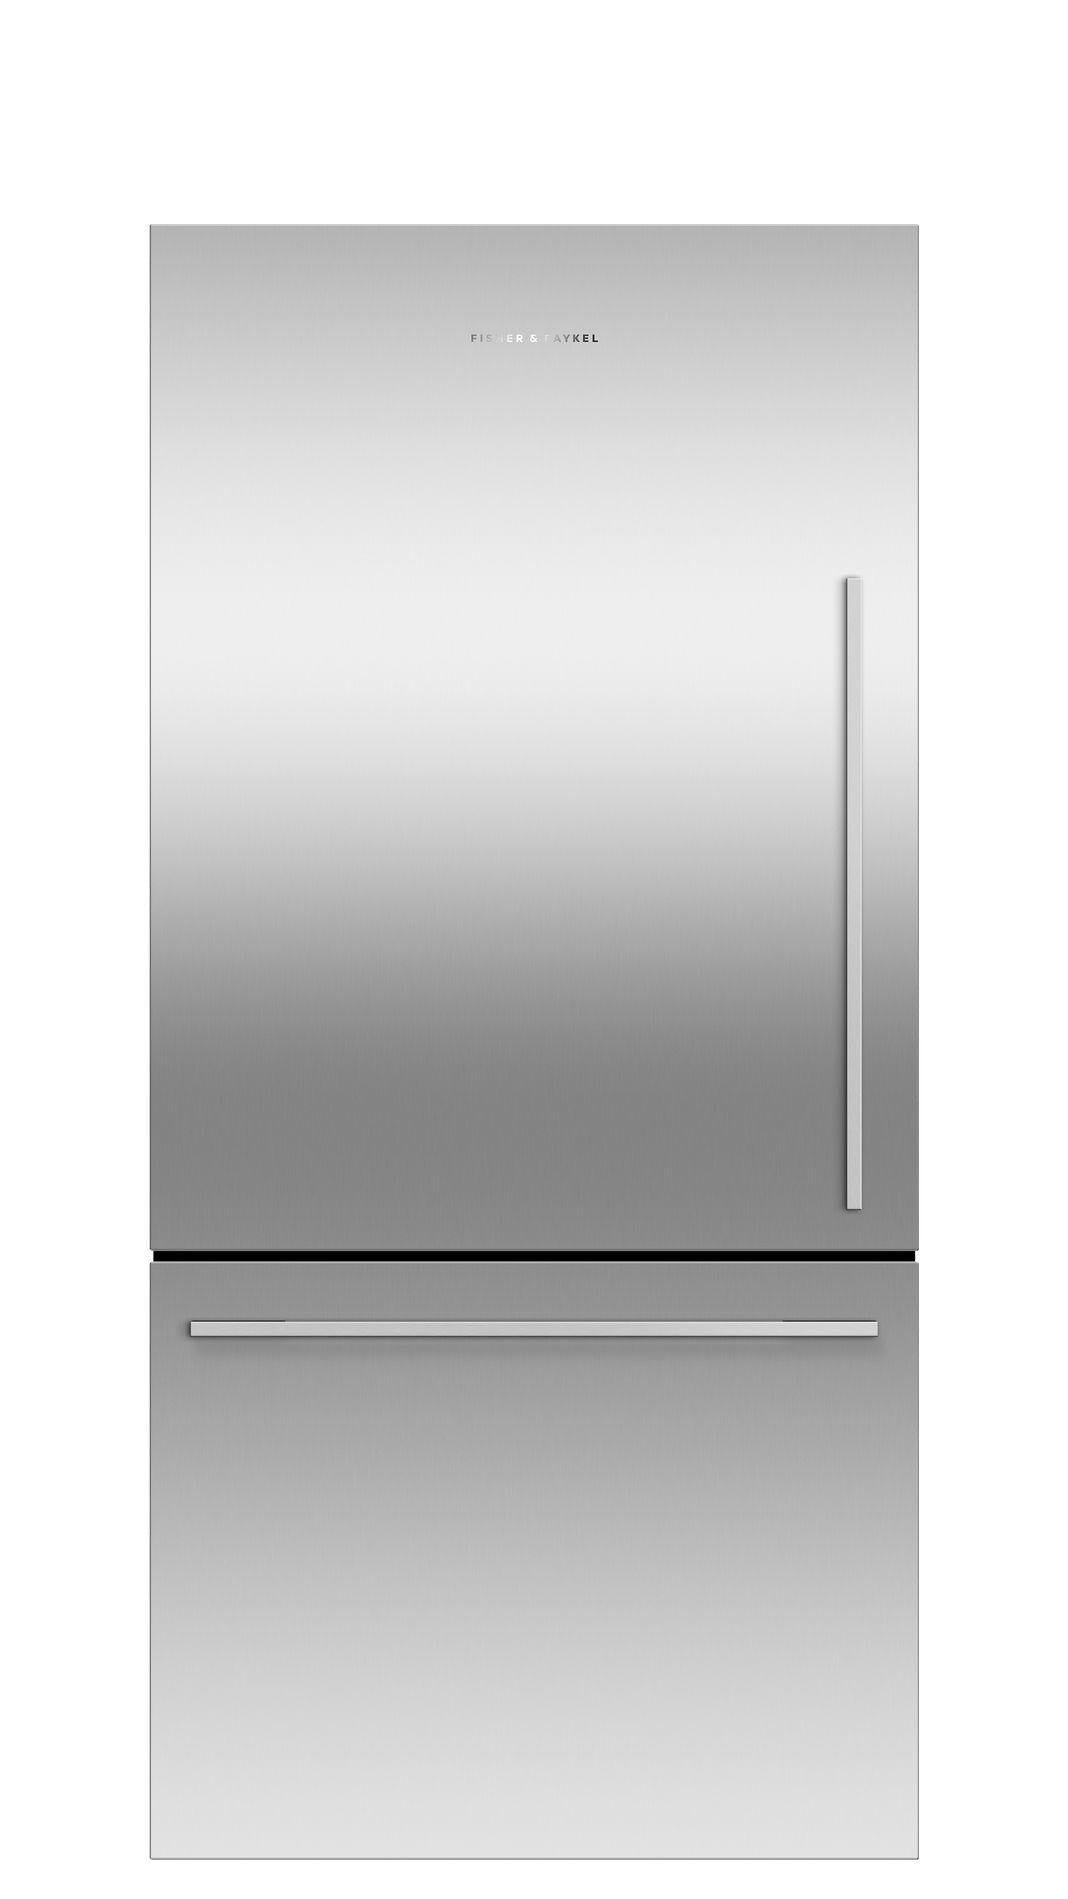 Fisher Paykel - 31 Inch 17.1 cu. ft Bottom Mount Refrigerator in Stainless - RF170WDLX5 N